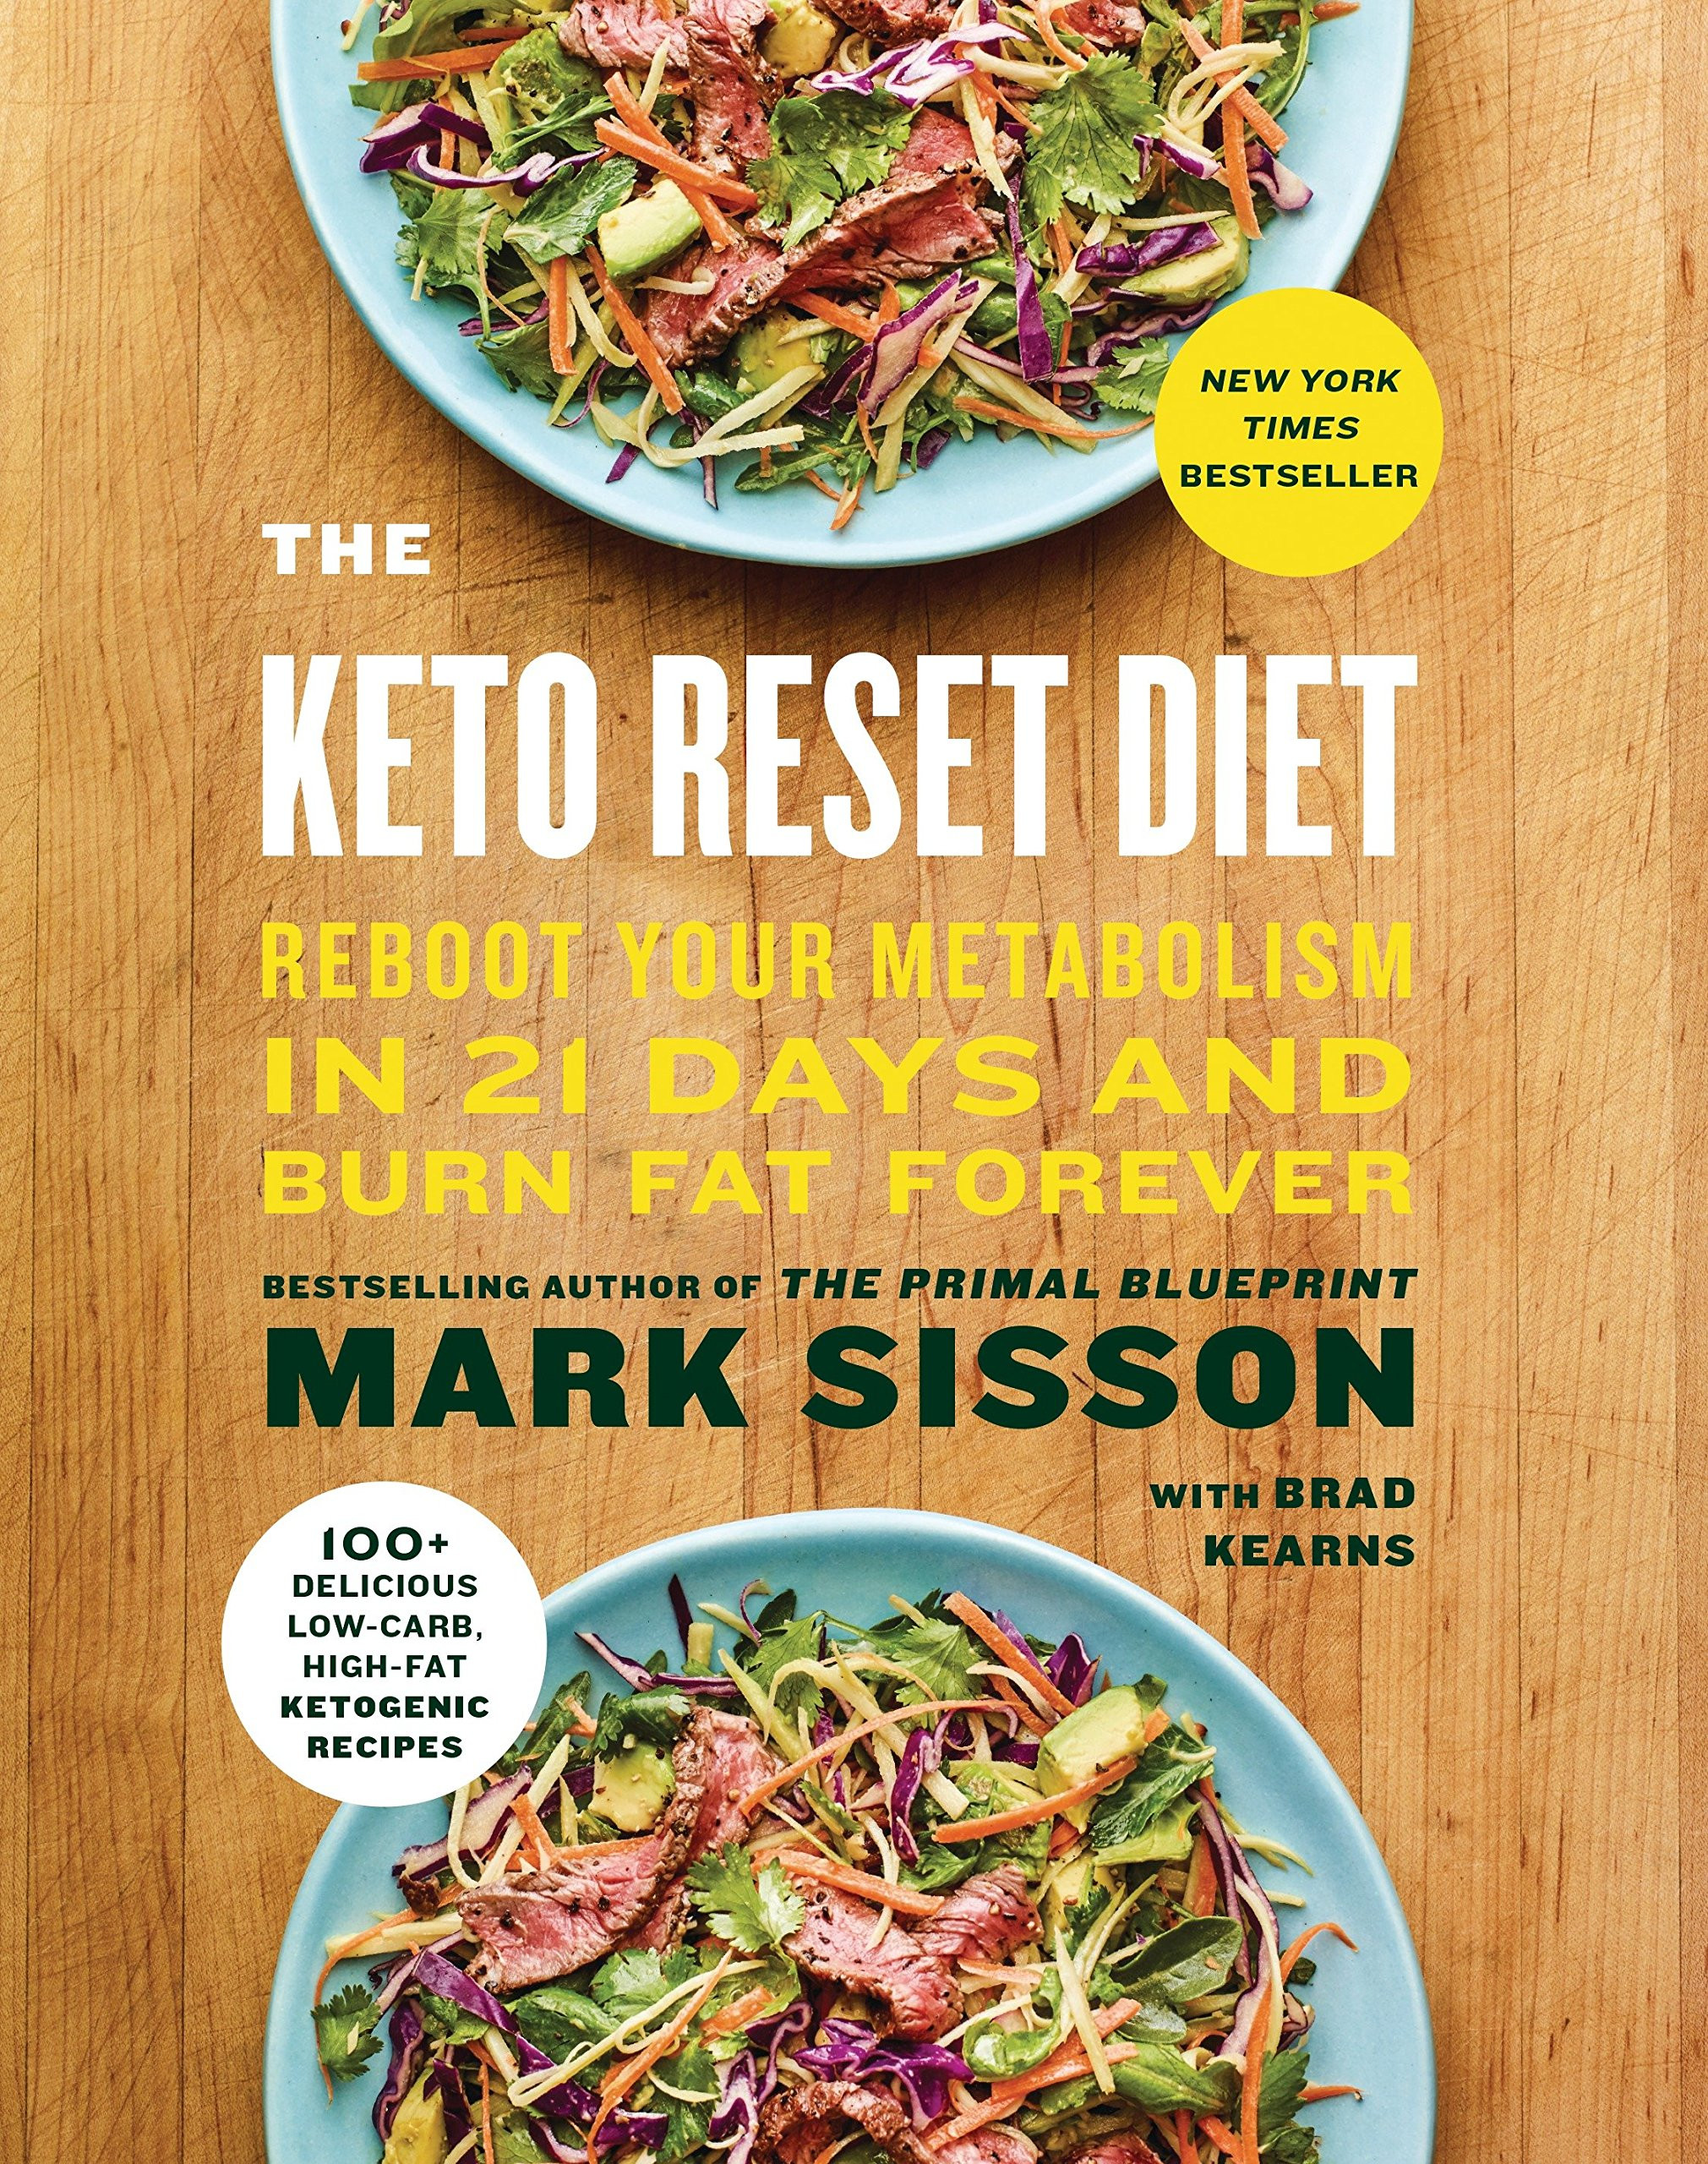 Keto Reset Diet Book Unique the Keto Reset Diet by Mark Sisson Bestbookbits